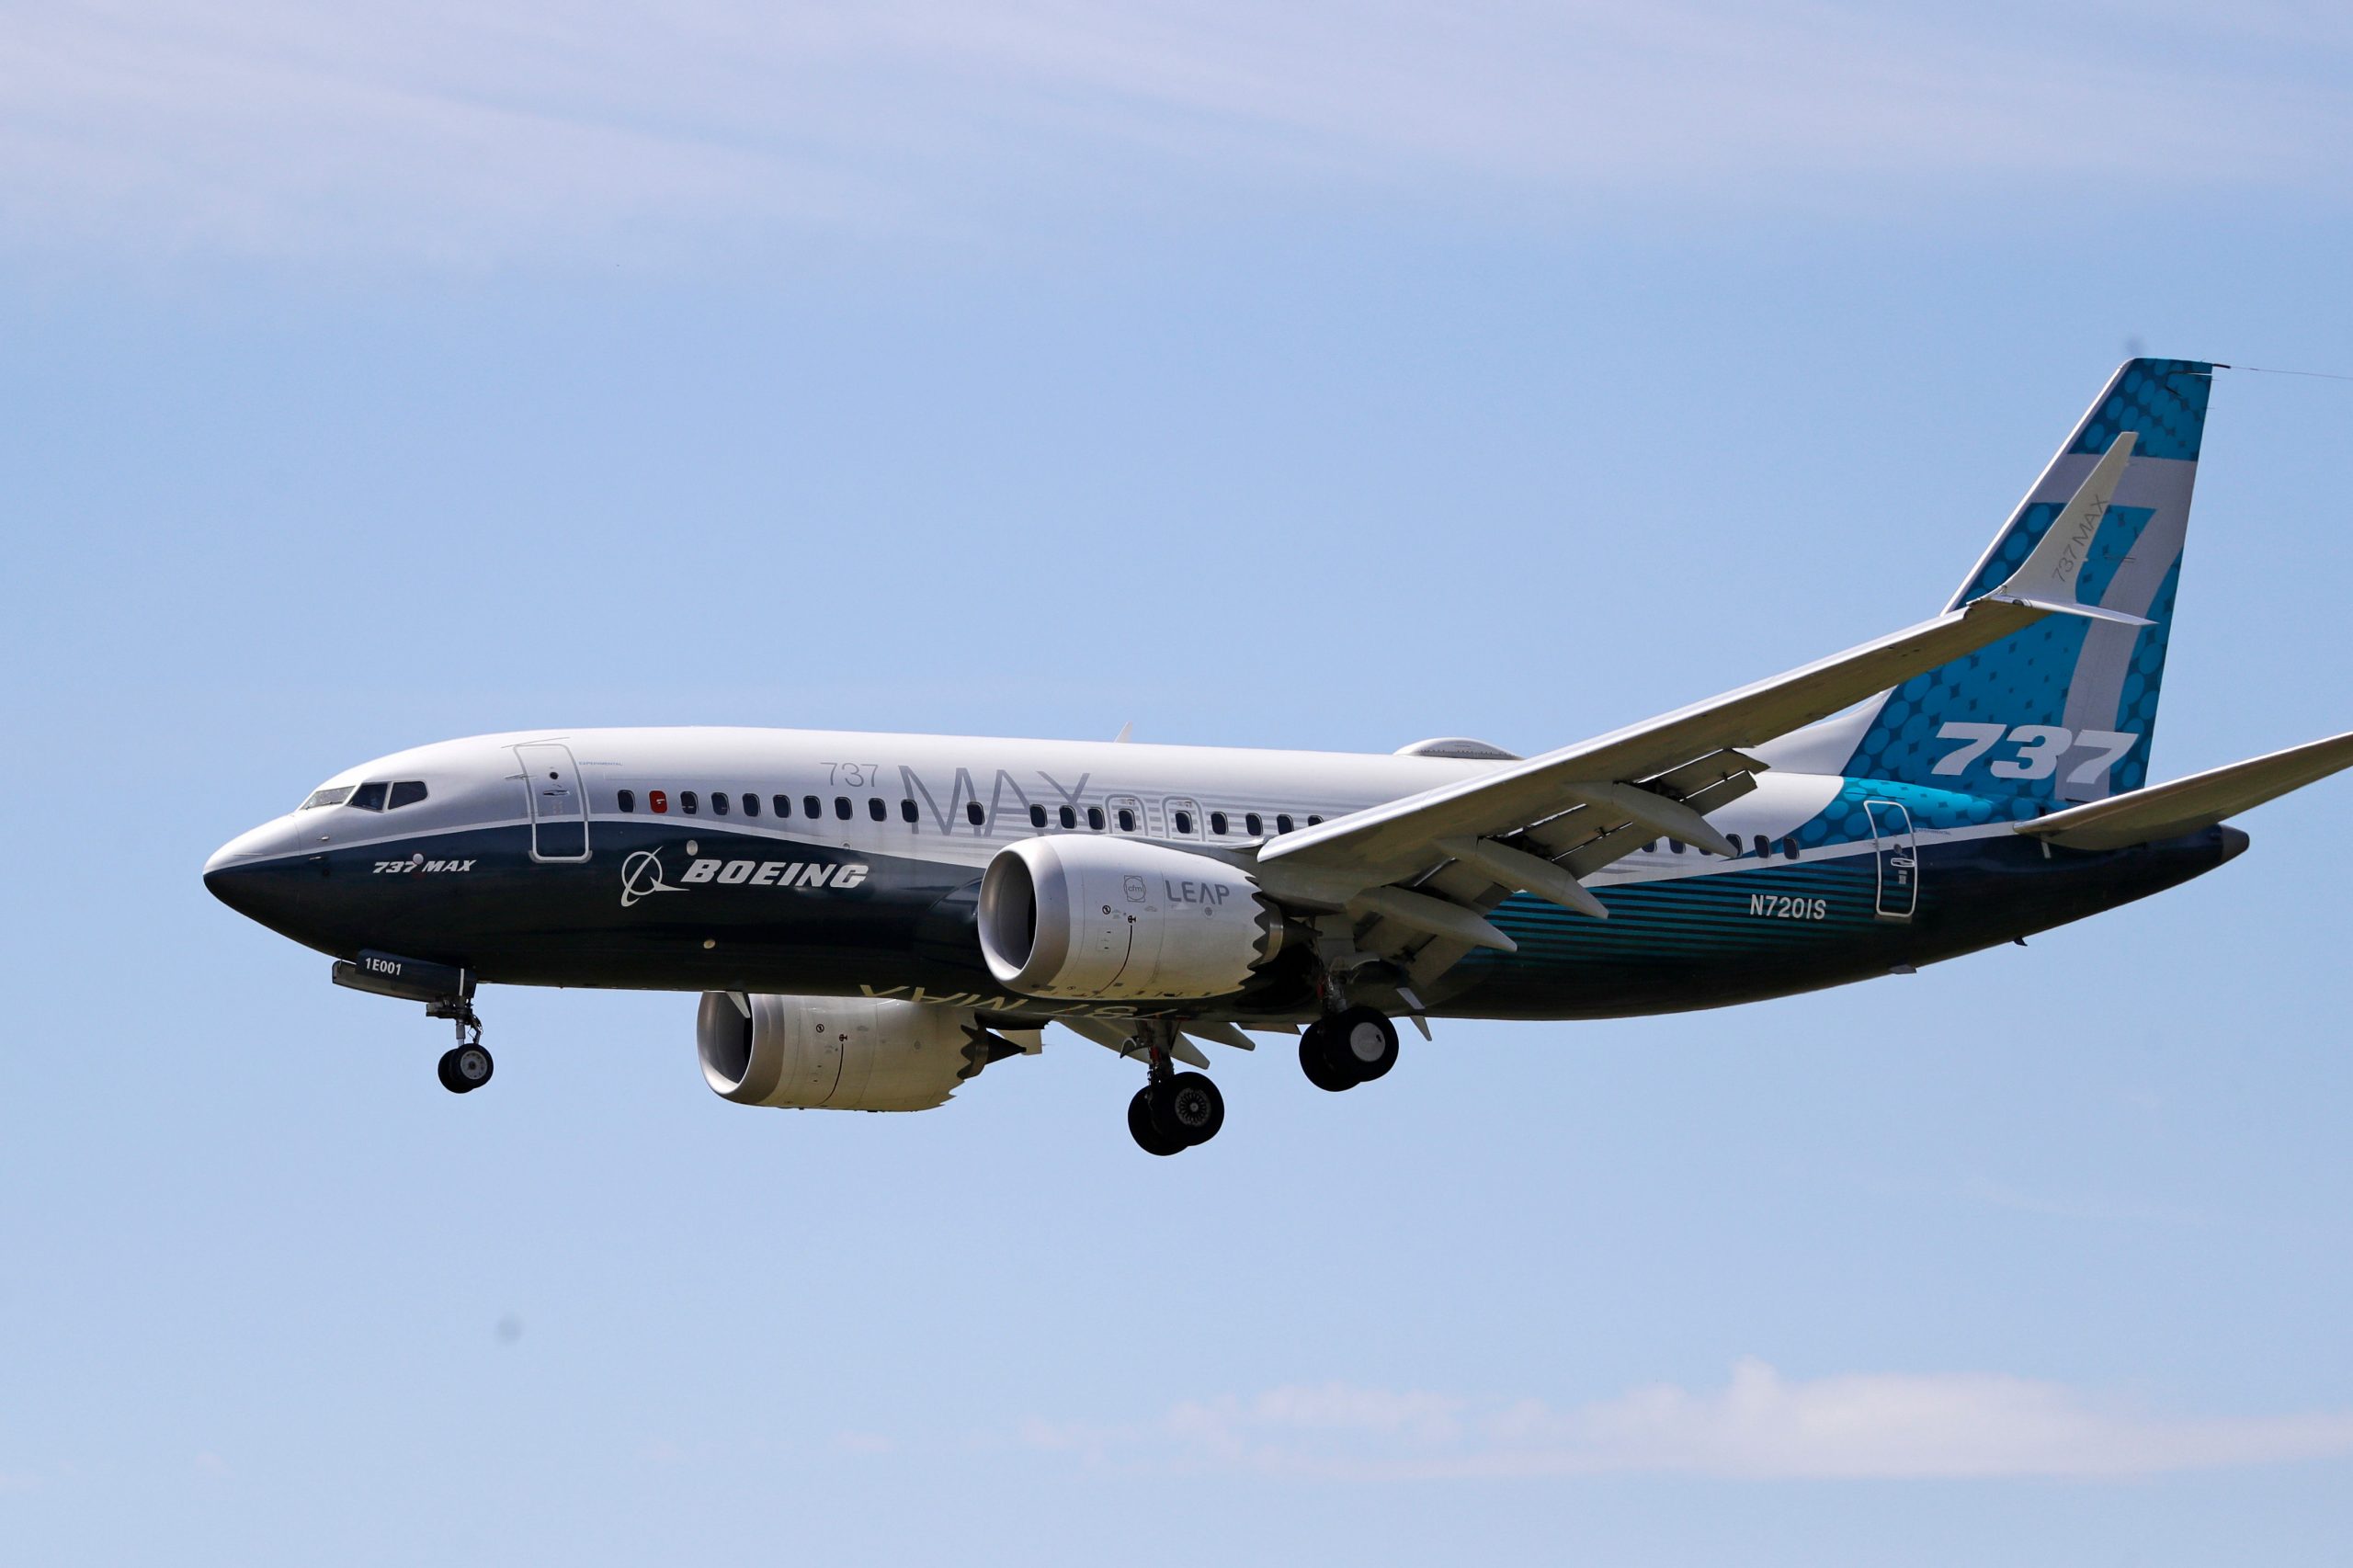 China plane crash: A look at recent air accidents involving Boeing 737s